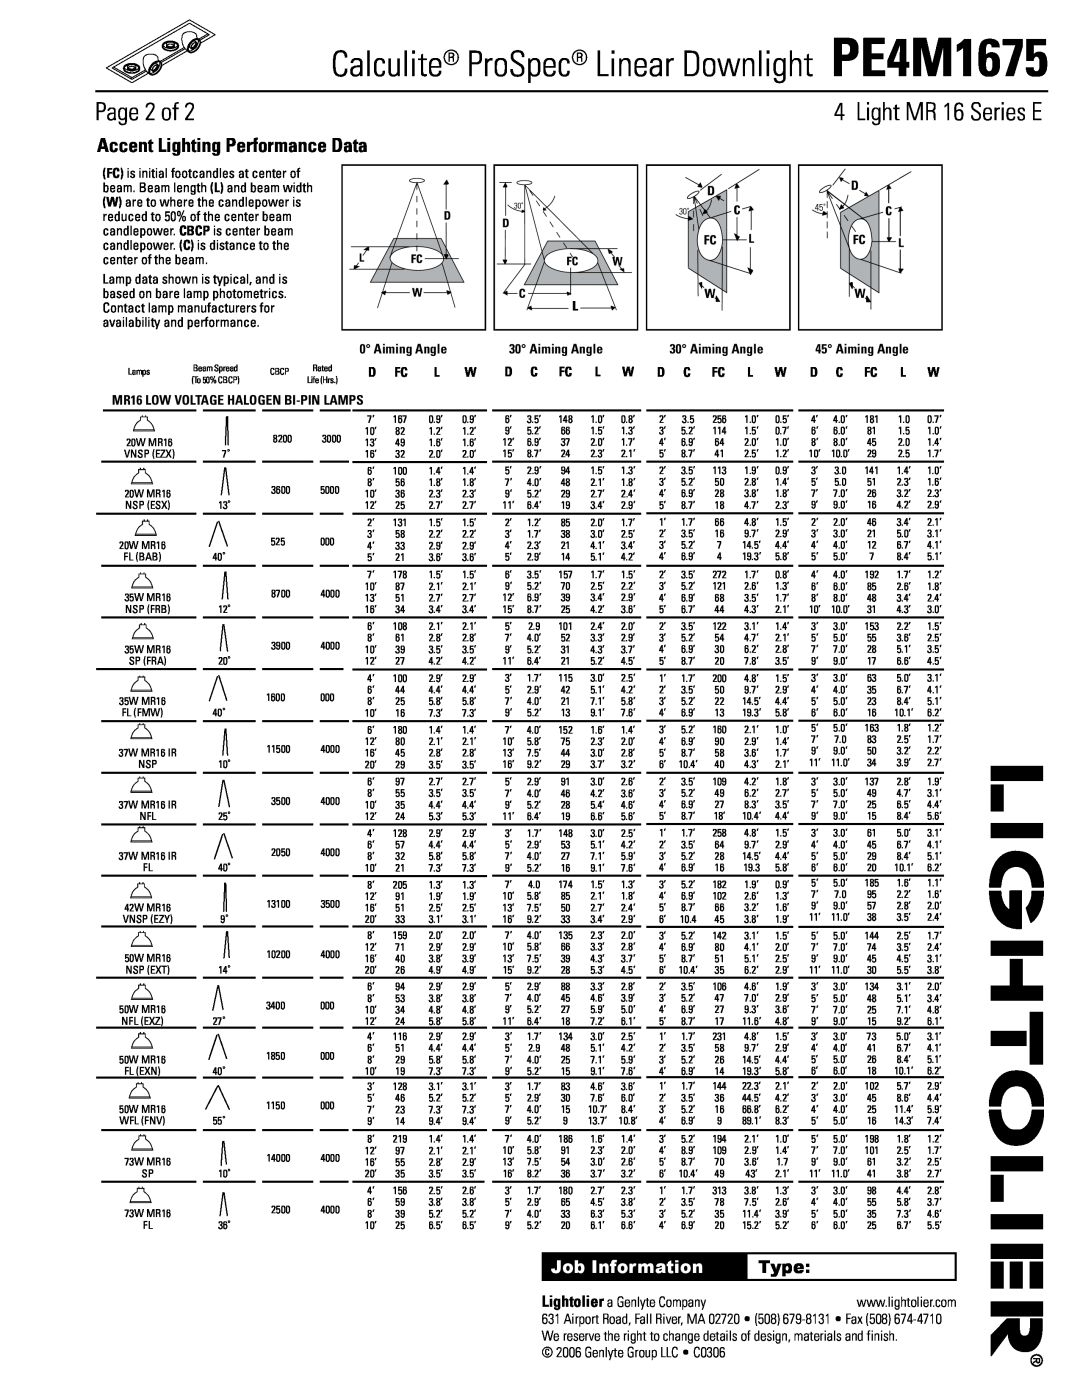 Lightolier Page 2 of, Accent Lighting Performance Data, Type, Calculite ProSpec Linear Downlight PE4M1675, Aiming Angle 